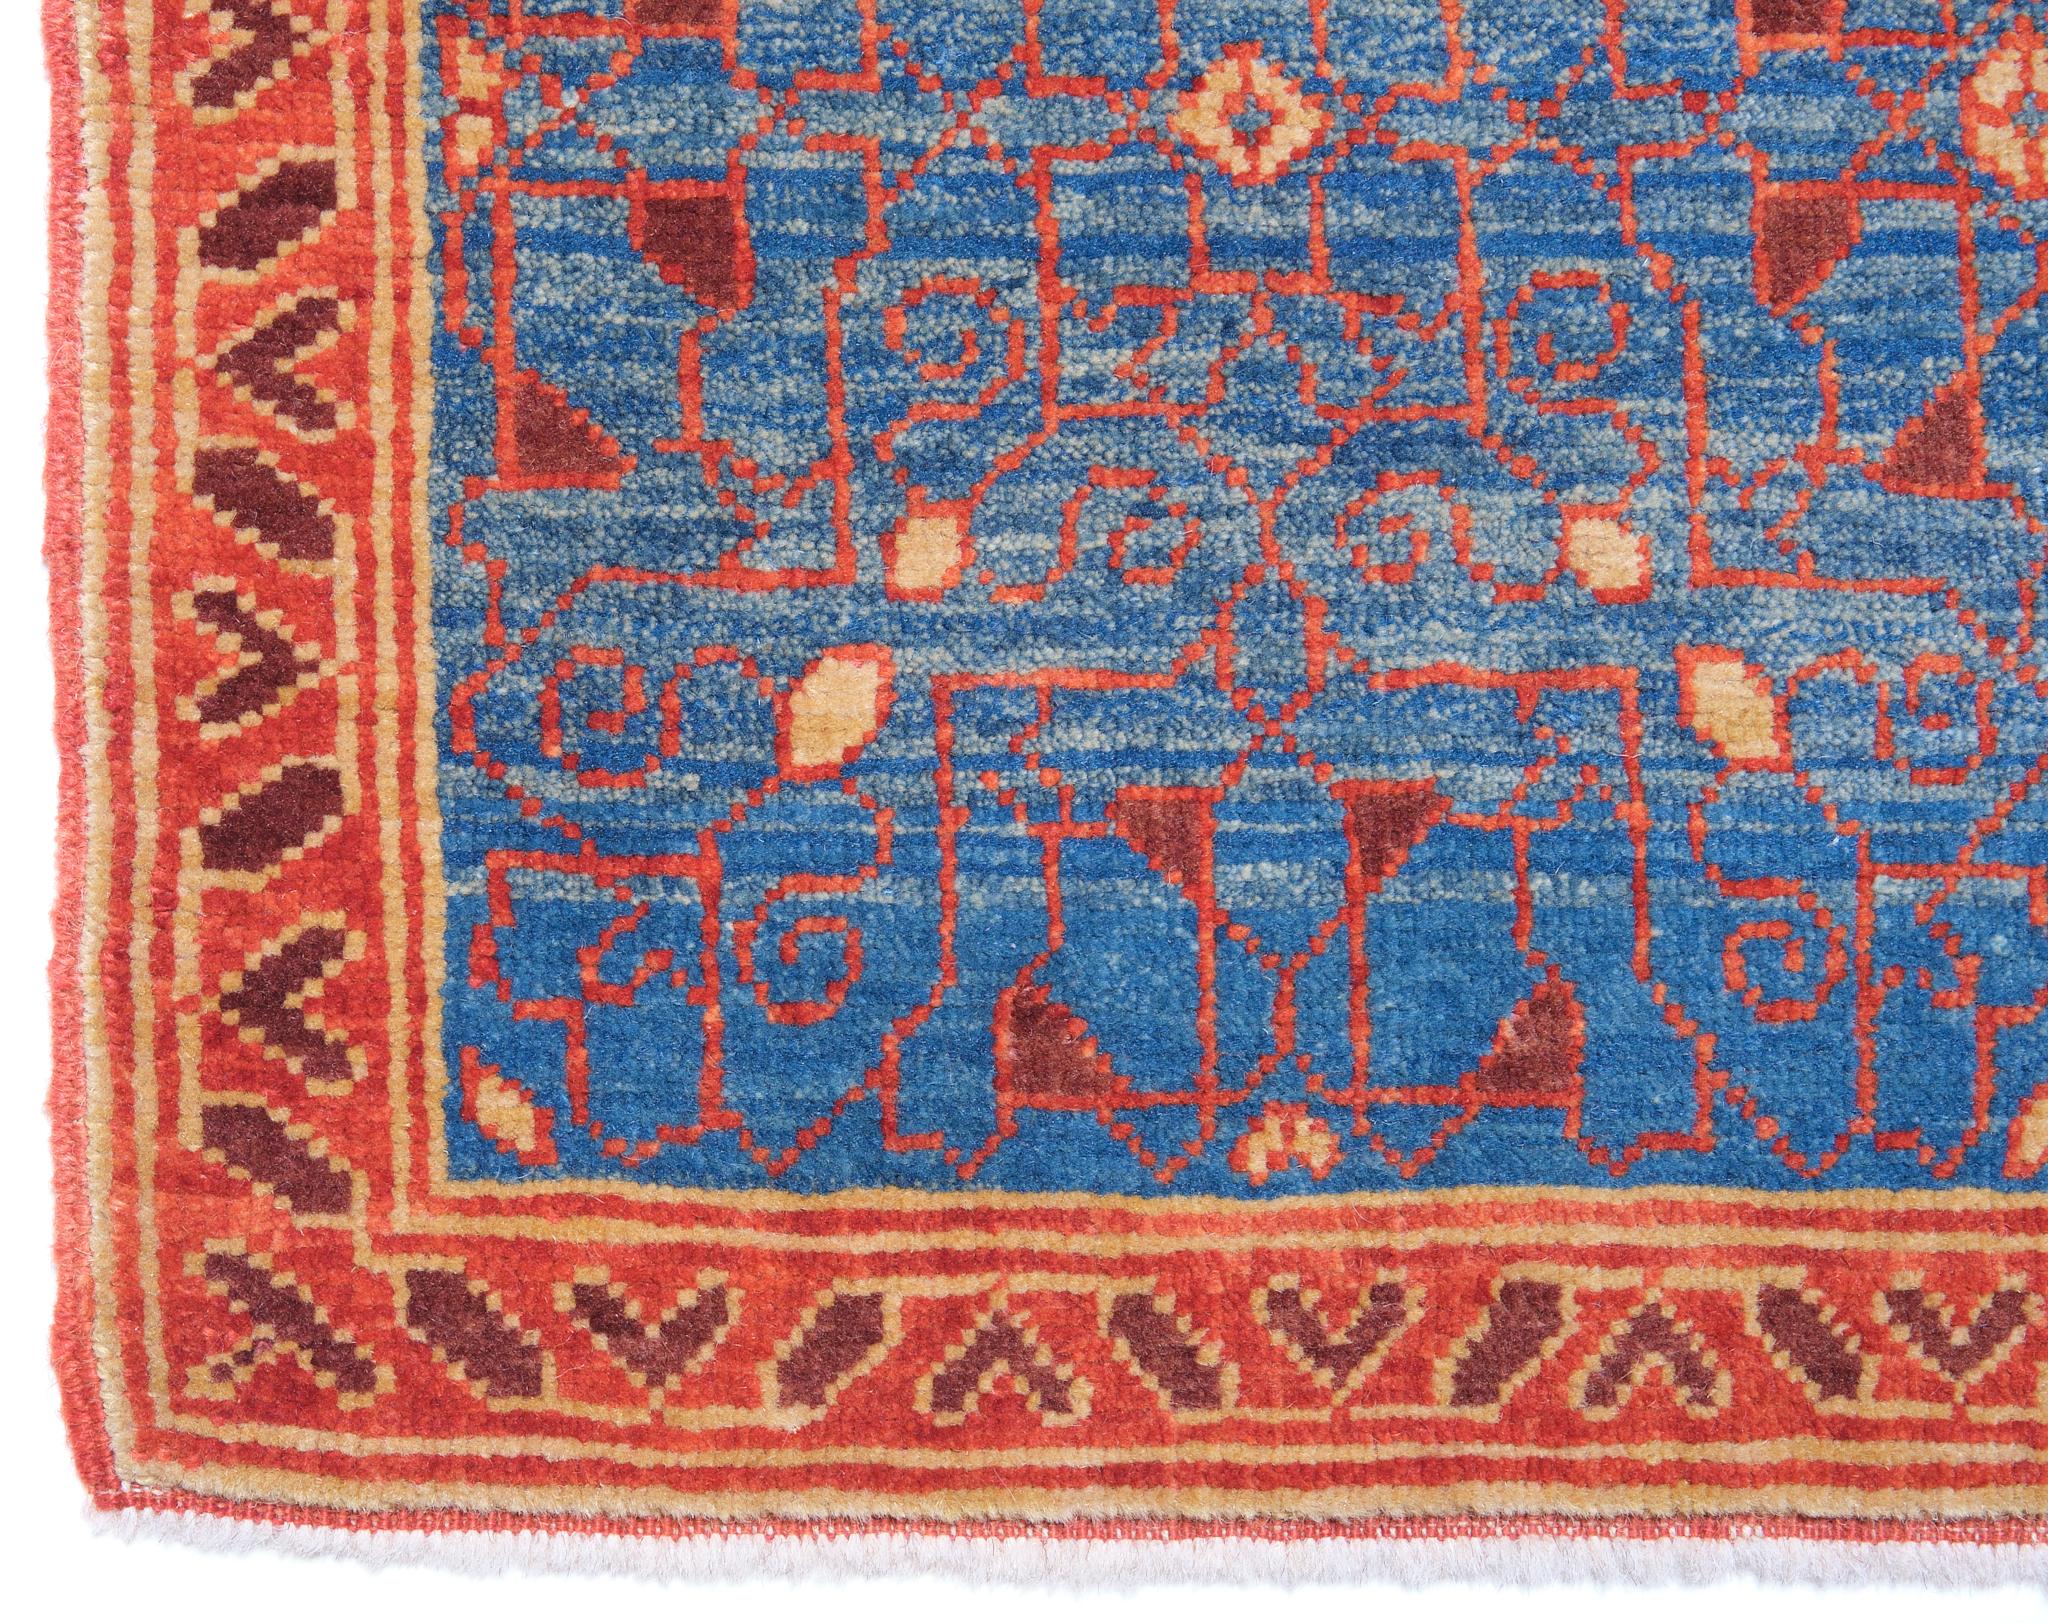 The source of rug comes from the possession of Endre Unger, which was sold at Sotheby’s in 1992. That rug with the central star was designed in the early 16th-century rug by Mamluk Sultane of Cairo, Egypt. The interpreted design is composed of